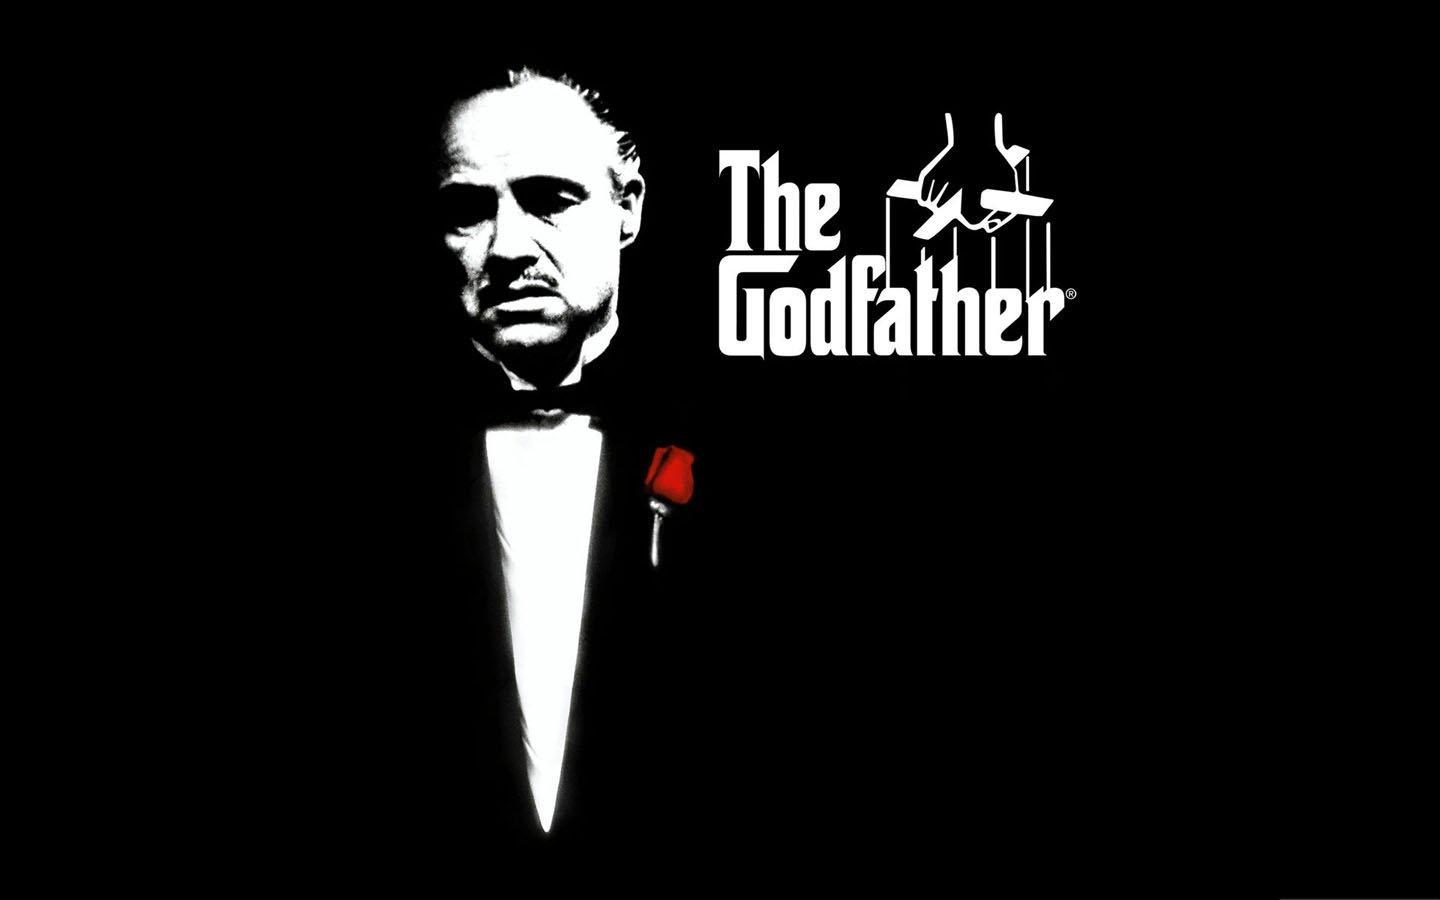 The Godfather Movie Poster Wallpapers Top Free The Godfather Movie Poster Backgrounds